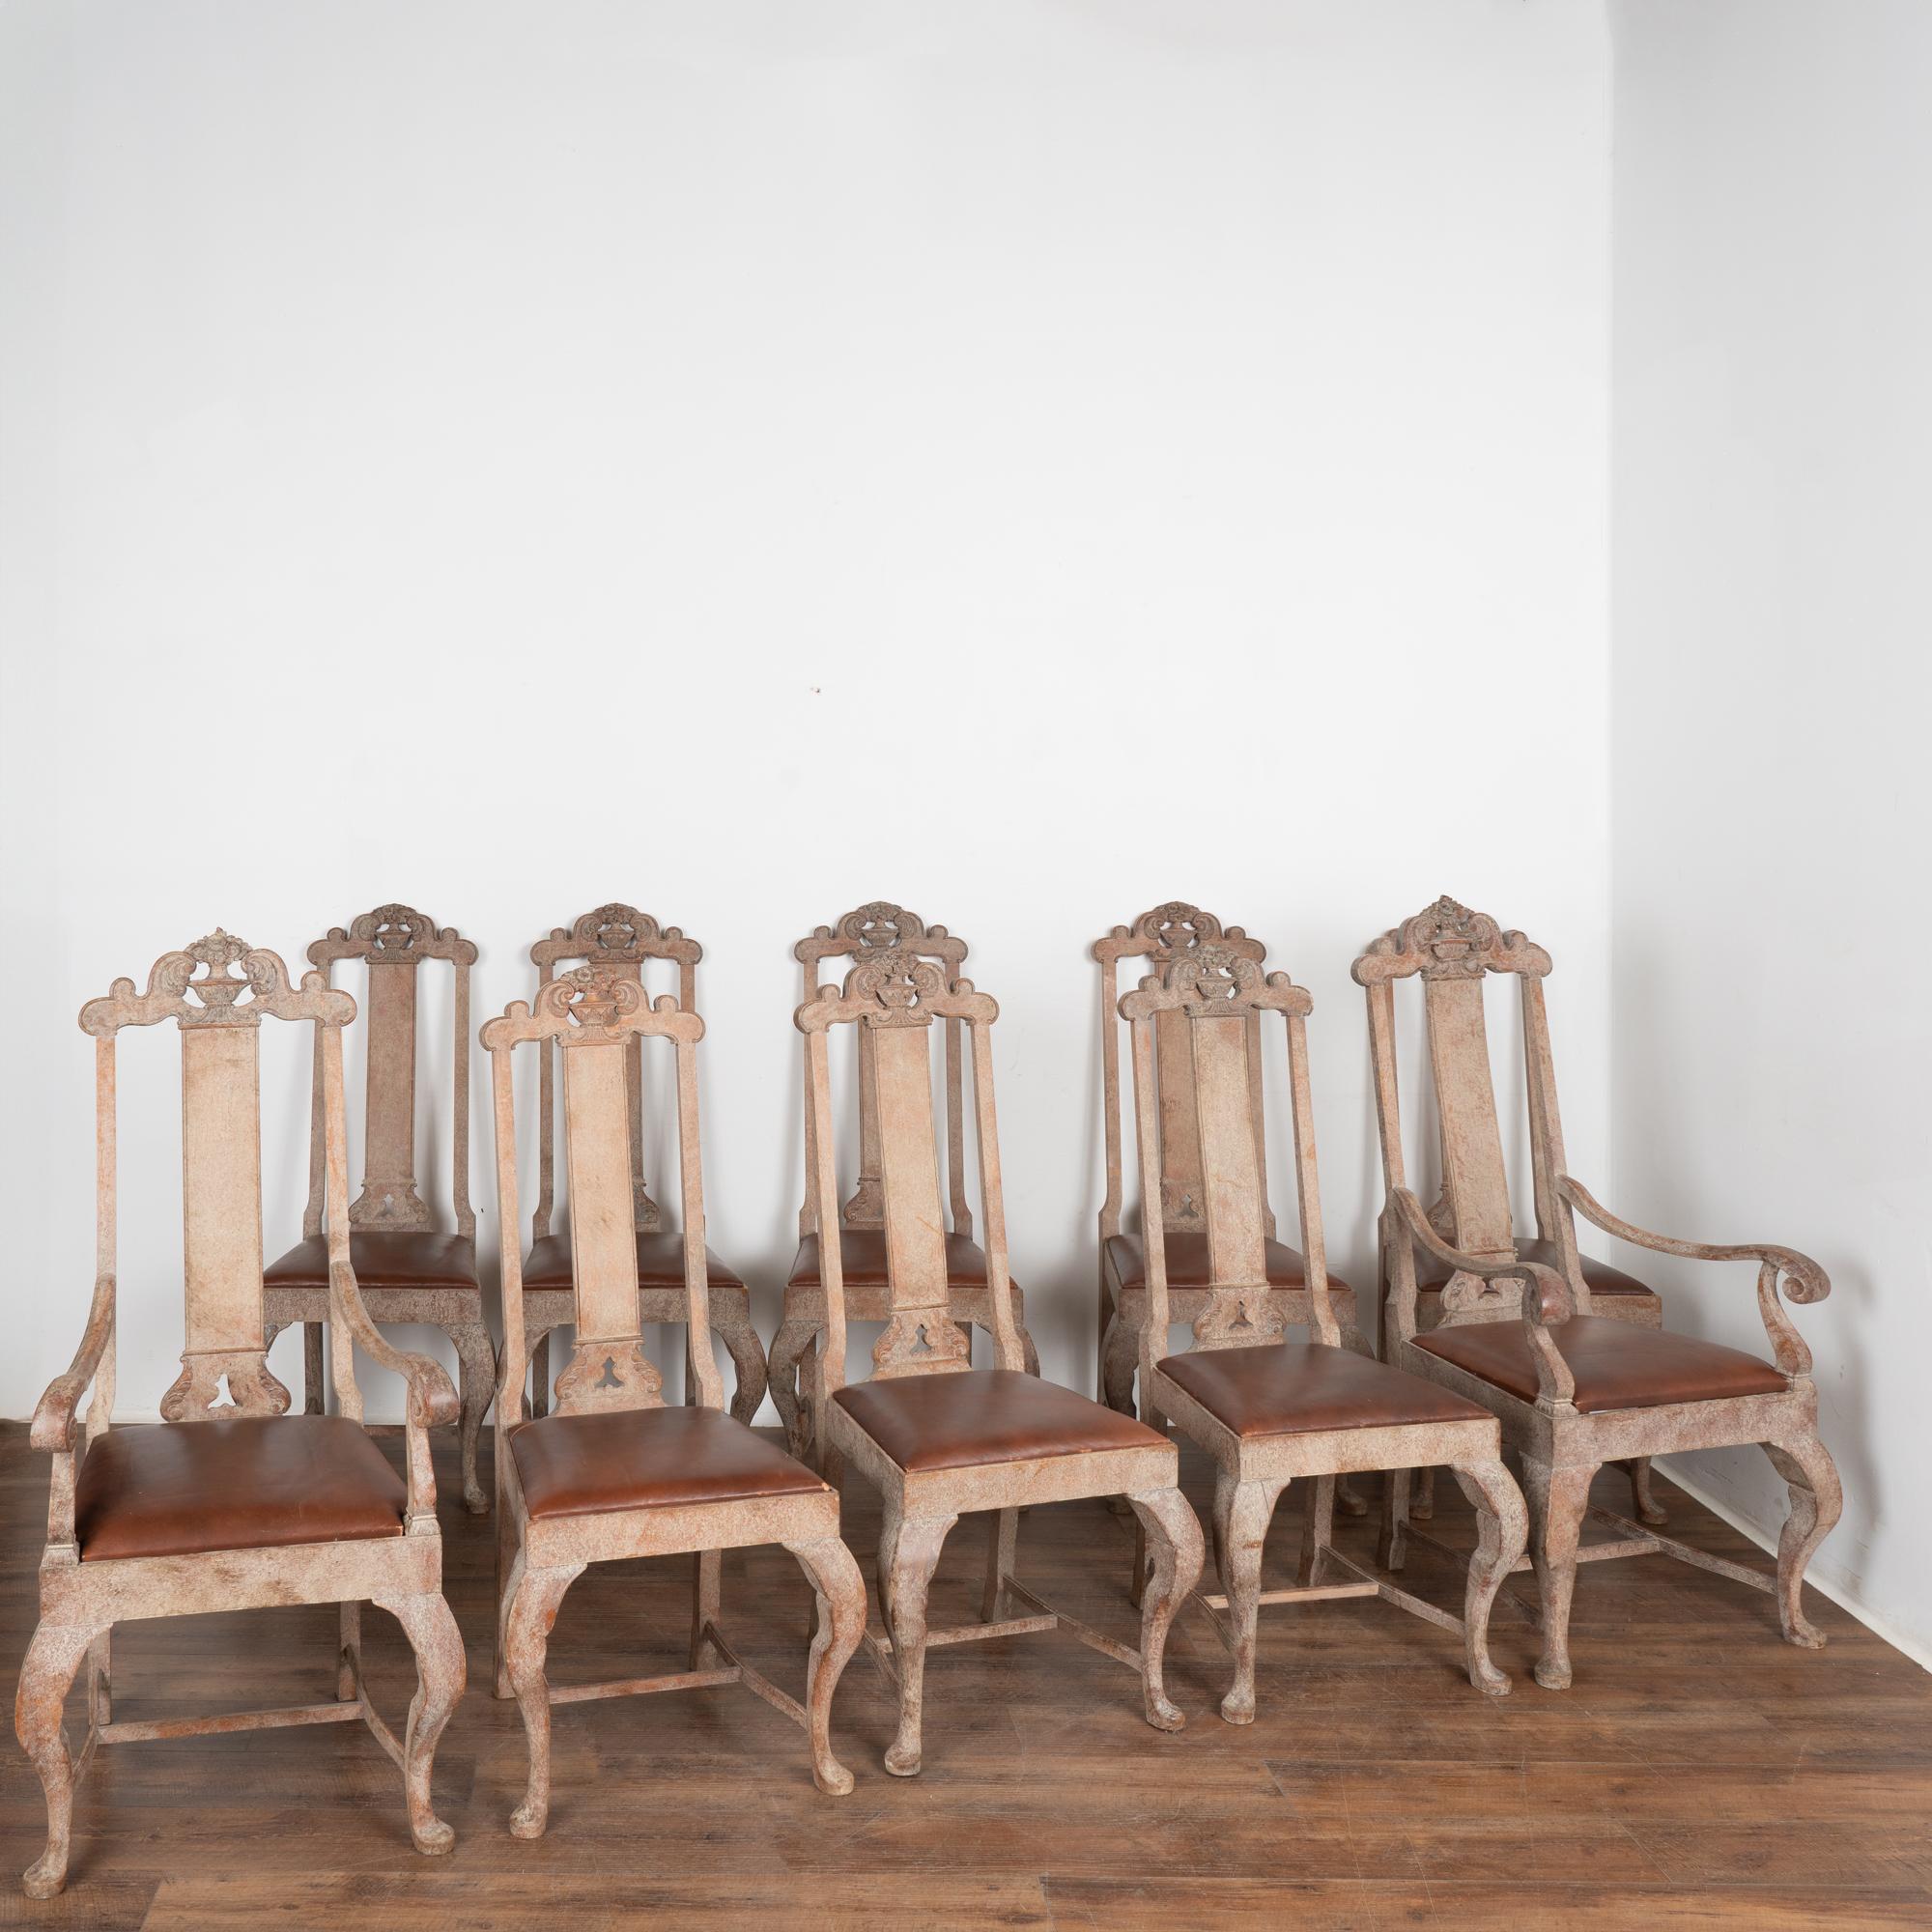 Antique set of ten Swedish country baroque dining chairs with tall backs, eight side chairs and two arm chairs included. 
Note the exceptional antique white painted and rubbed out finish, creating a rich, deep look with the natural oak revealed